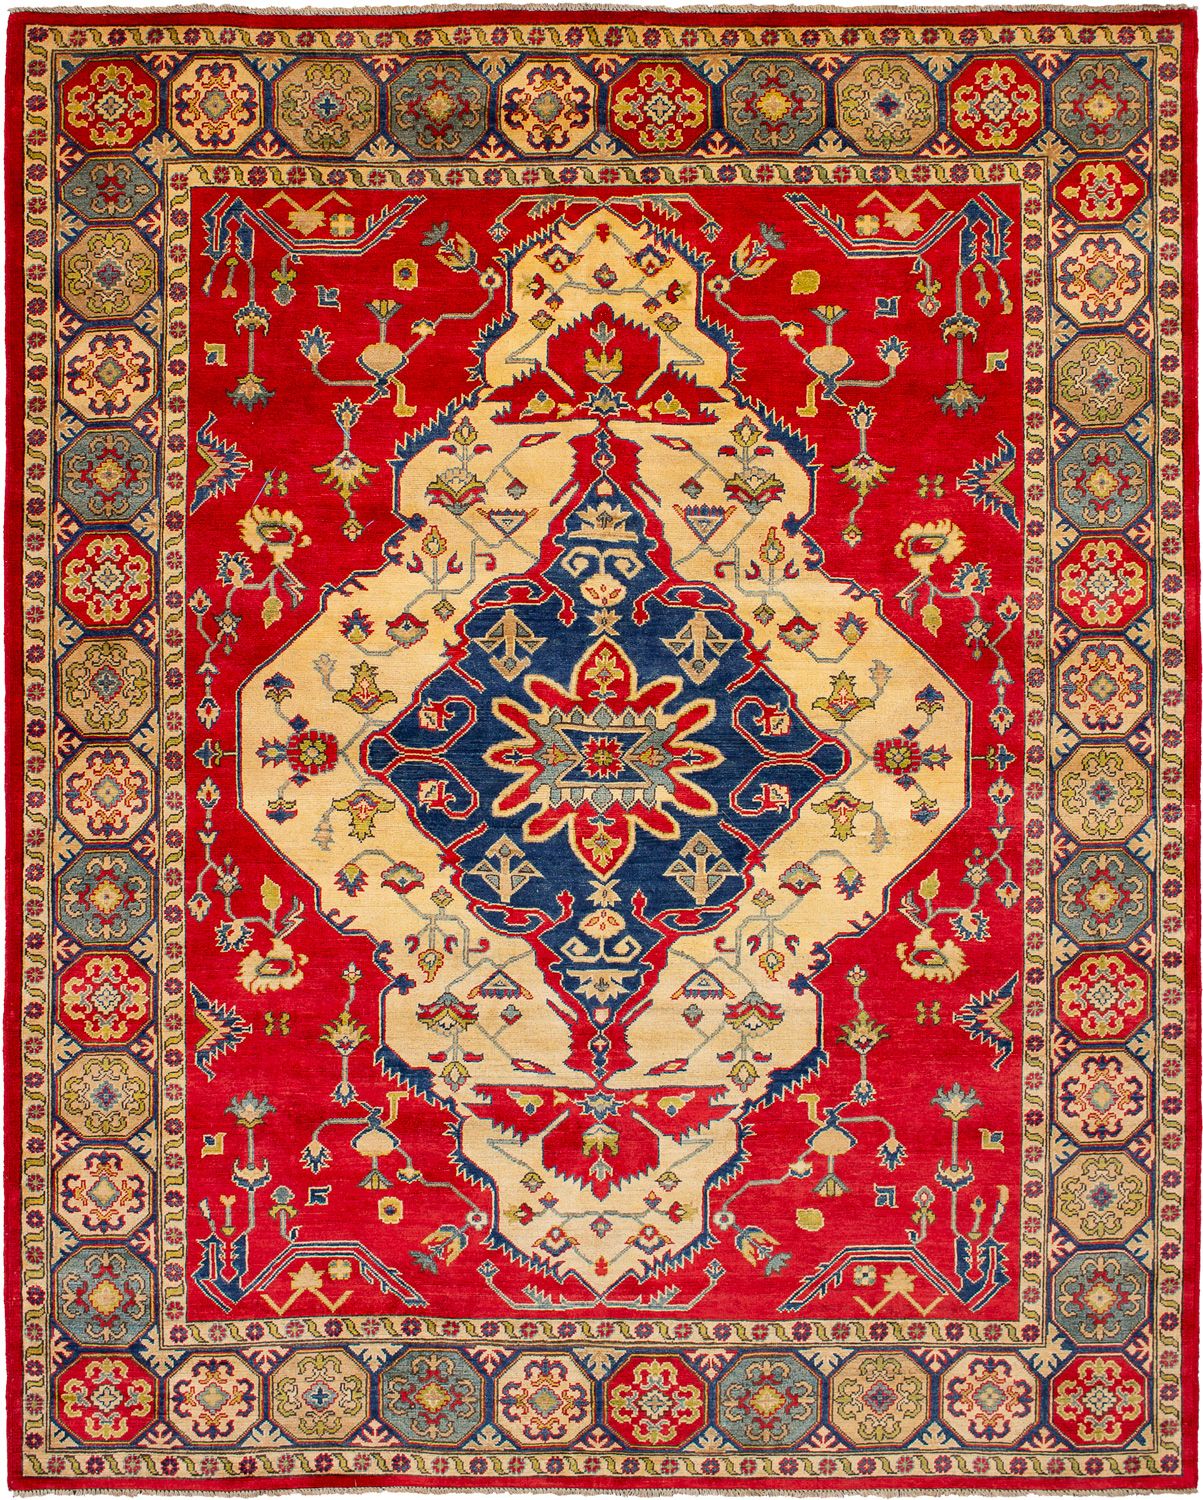 Hand-knotted Finest Gazni Red Wool Rug 7'10" x 9'9"  Size: 7'10" x 9'9"  